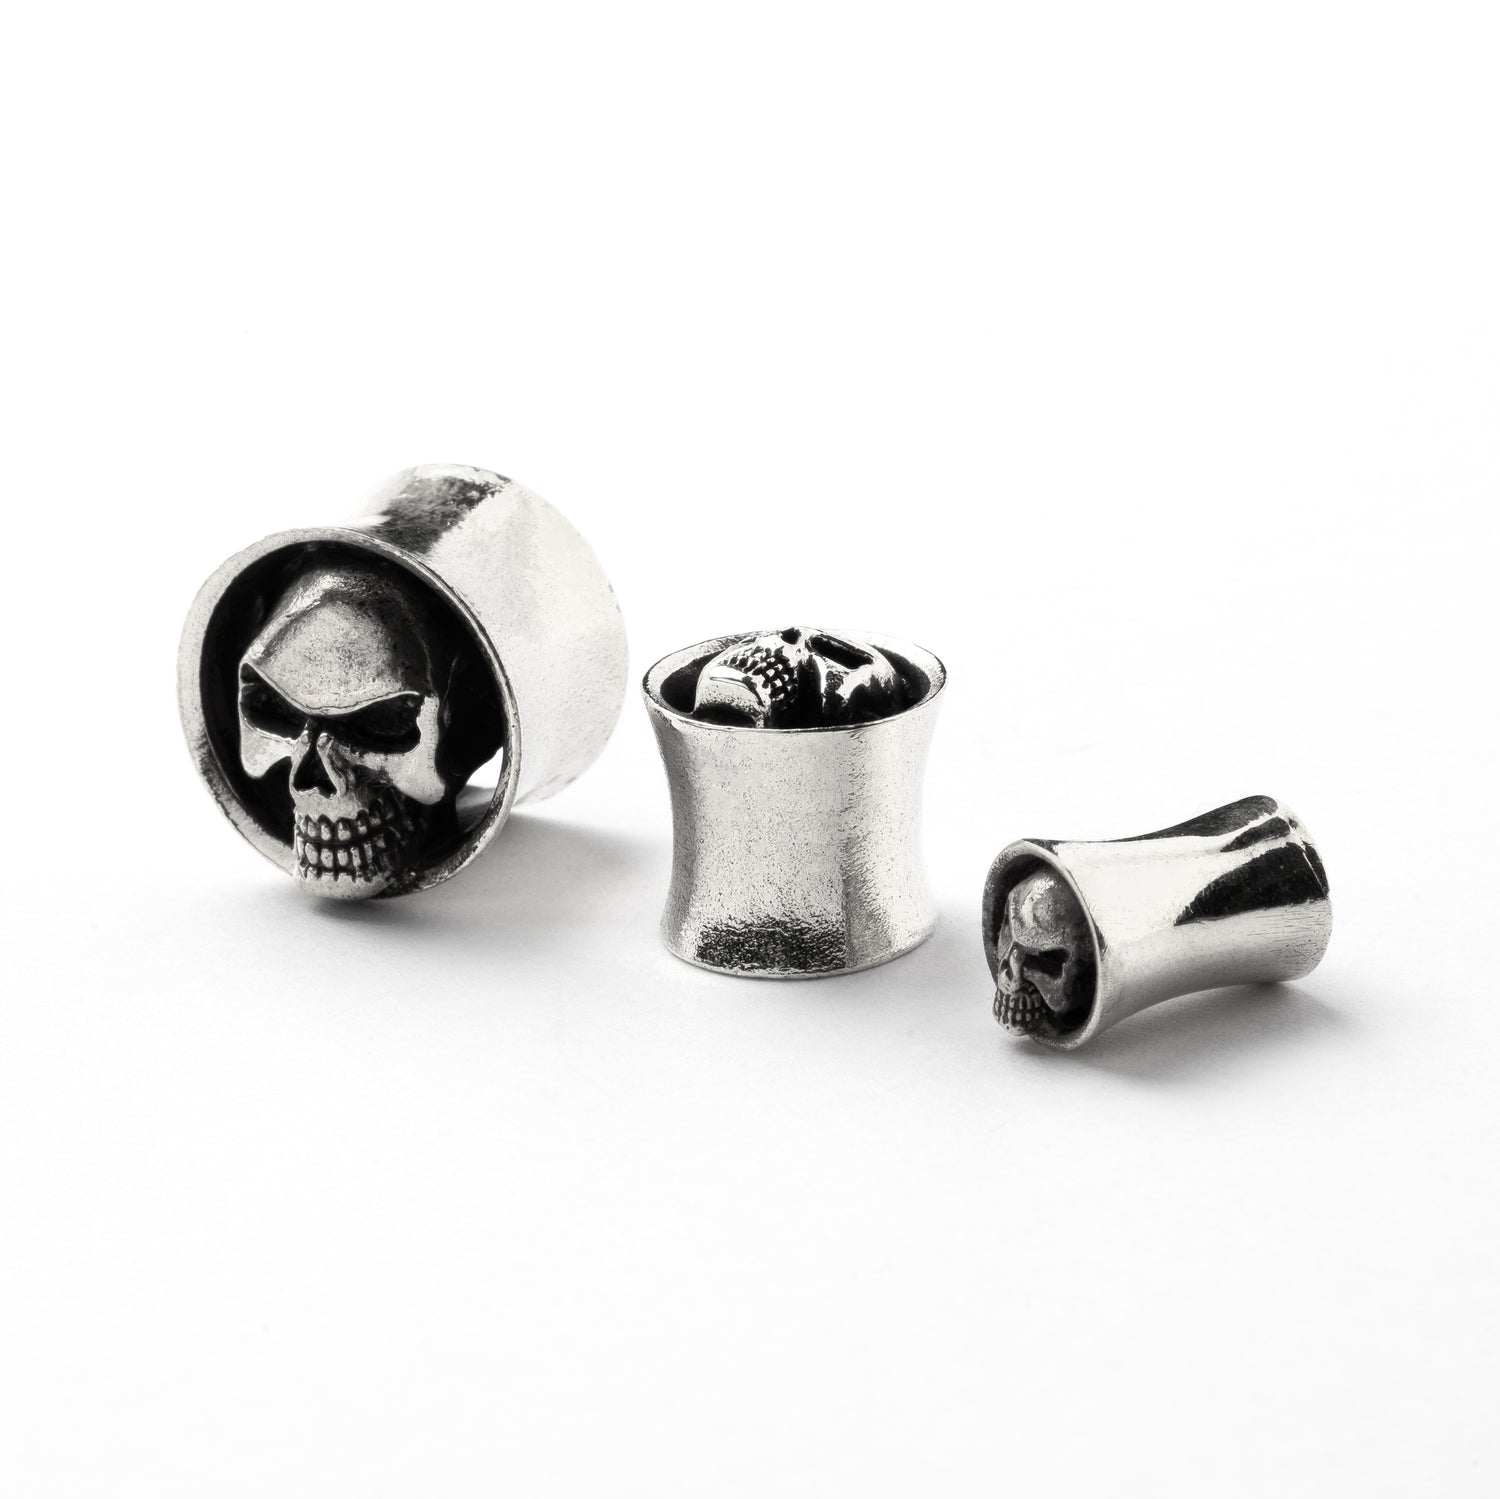 White brass skull ear plugs front and side view